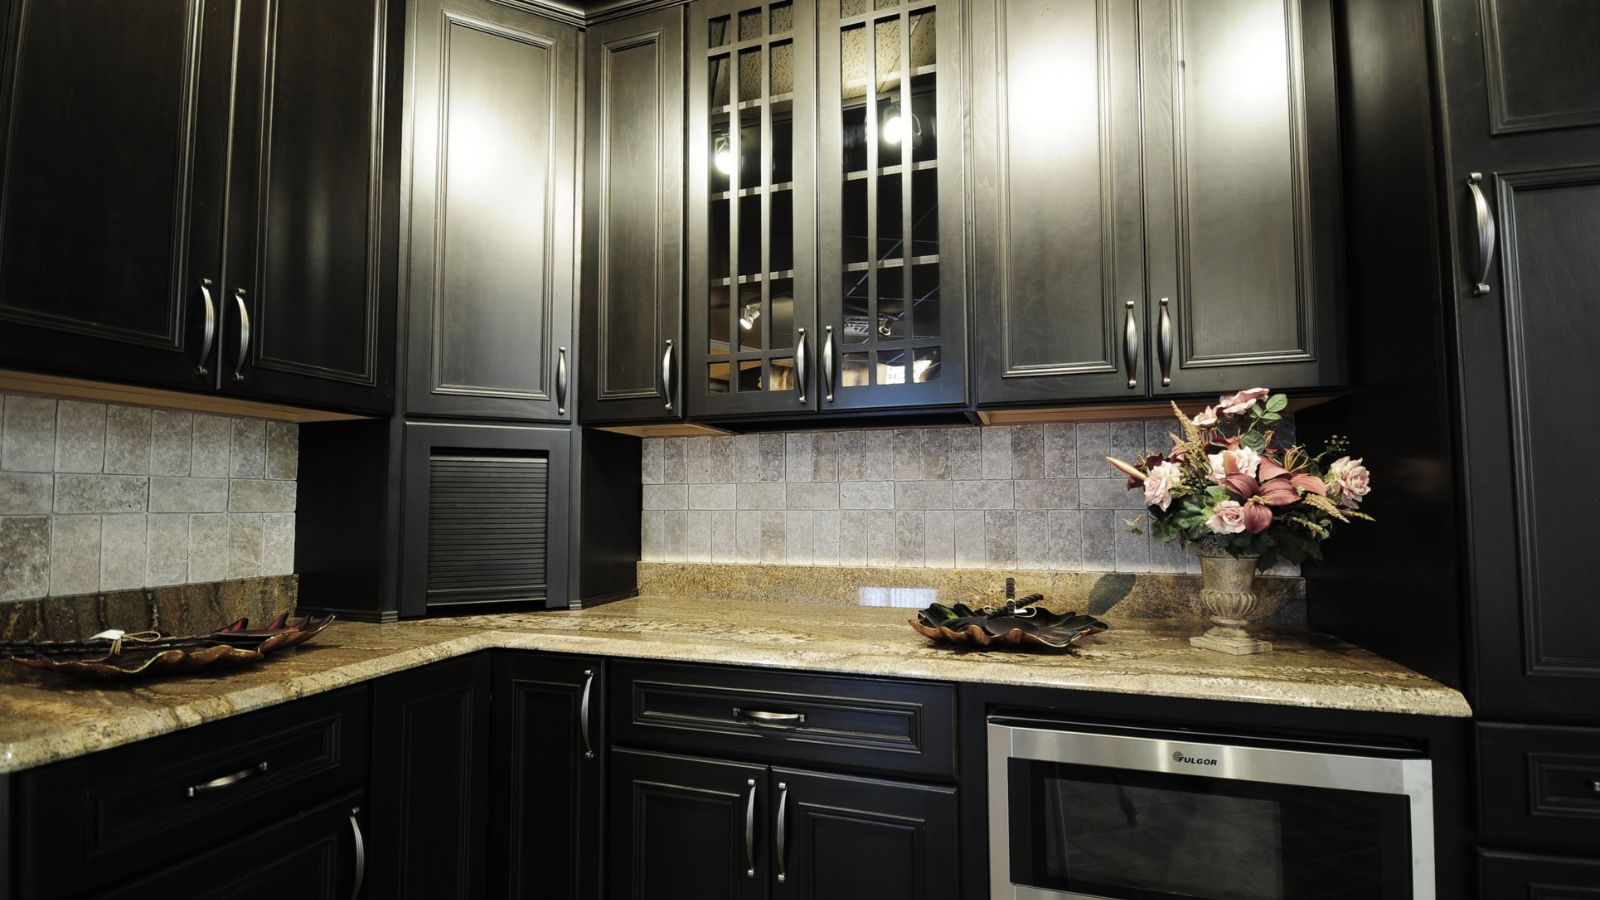 How to Light Up a Dark Kitchen in Style